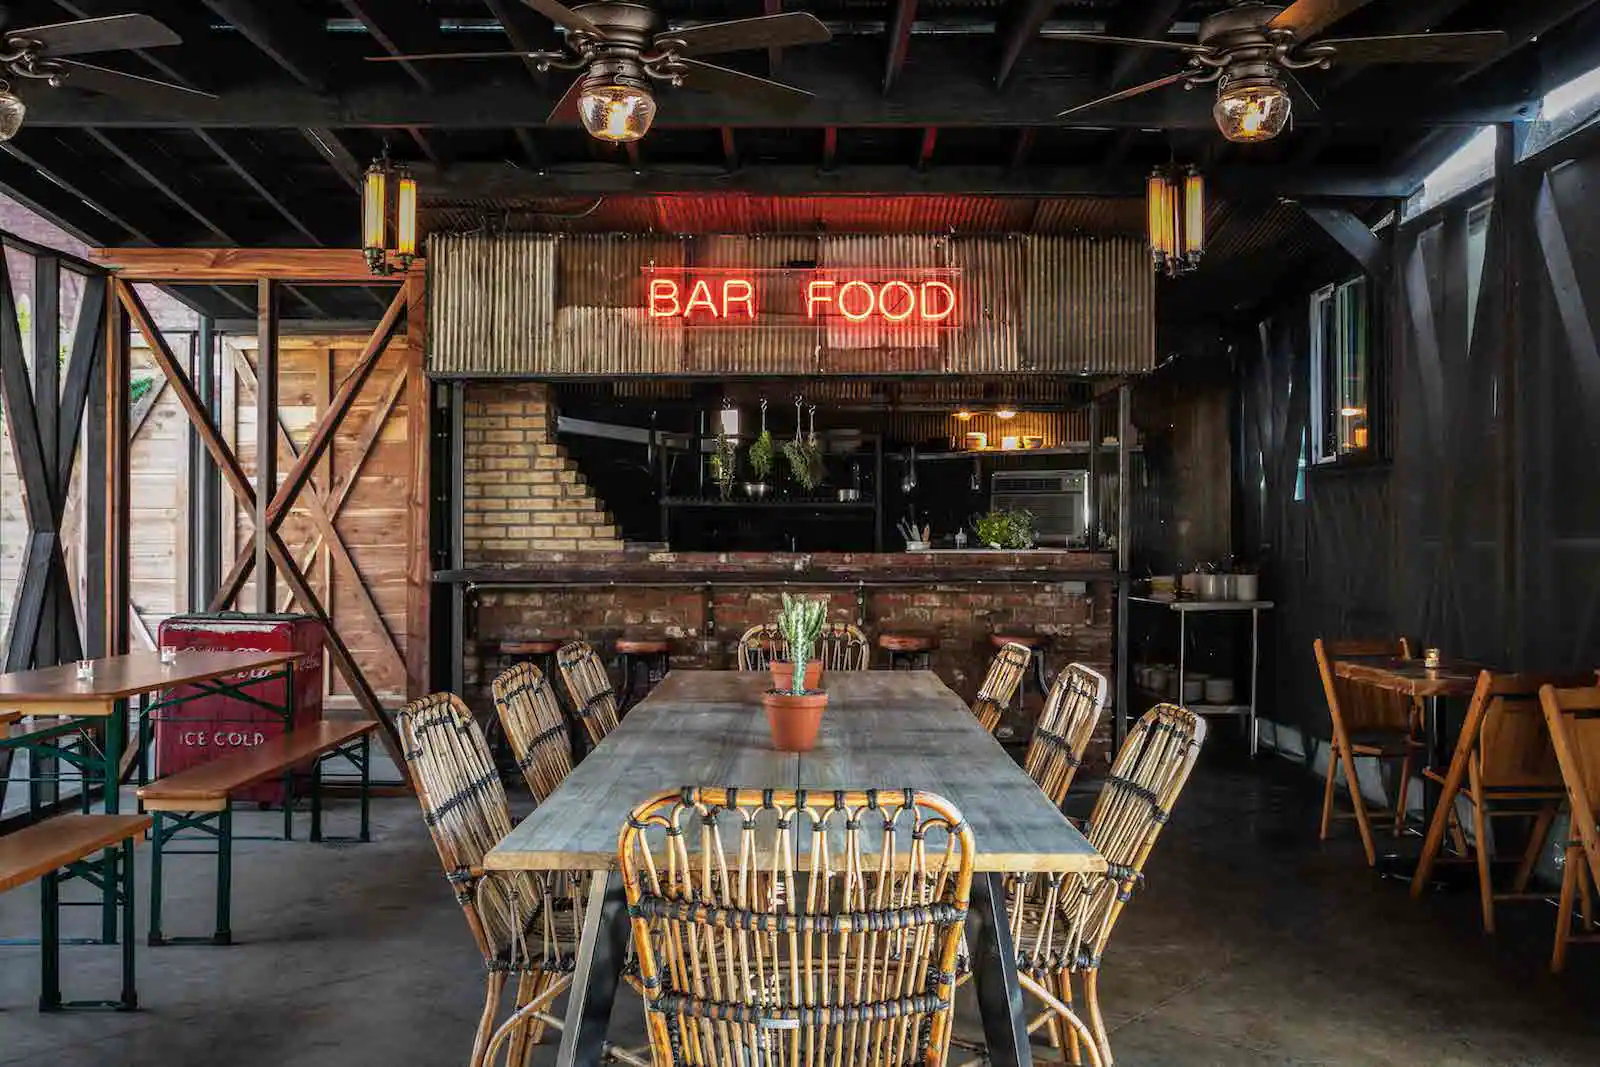 View of the main dining area of Urban Cowboy's Public House Kitchen and Bar. Woven chairs make up the area in the center, with wooden benches and tables in the areas beside.